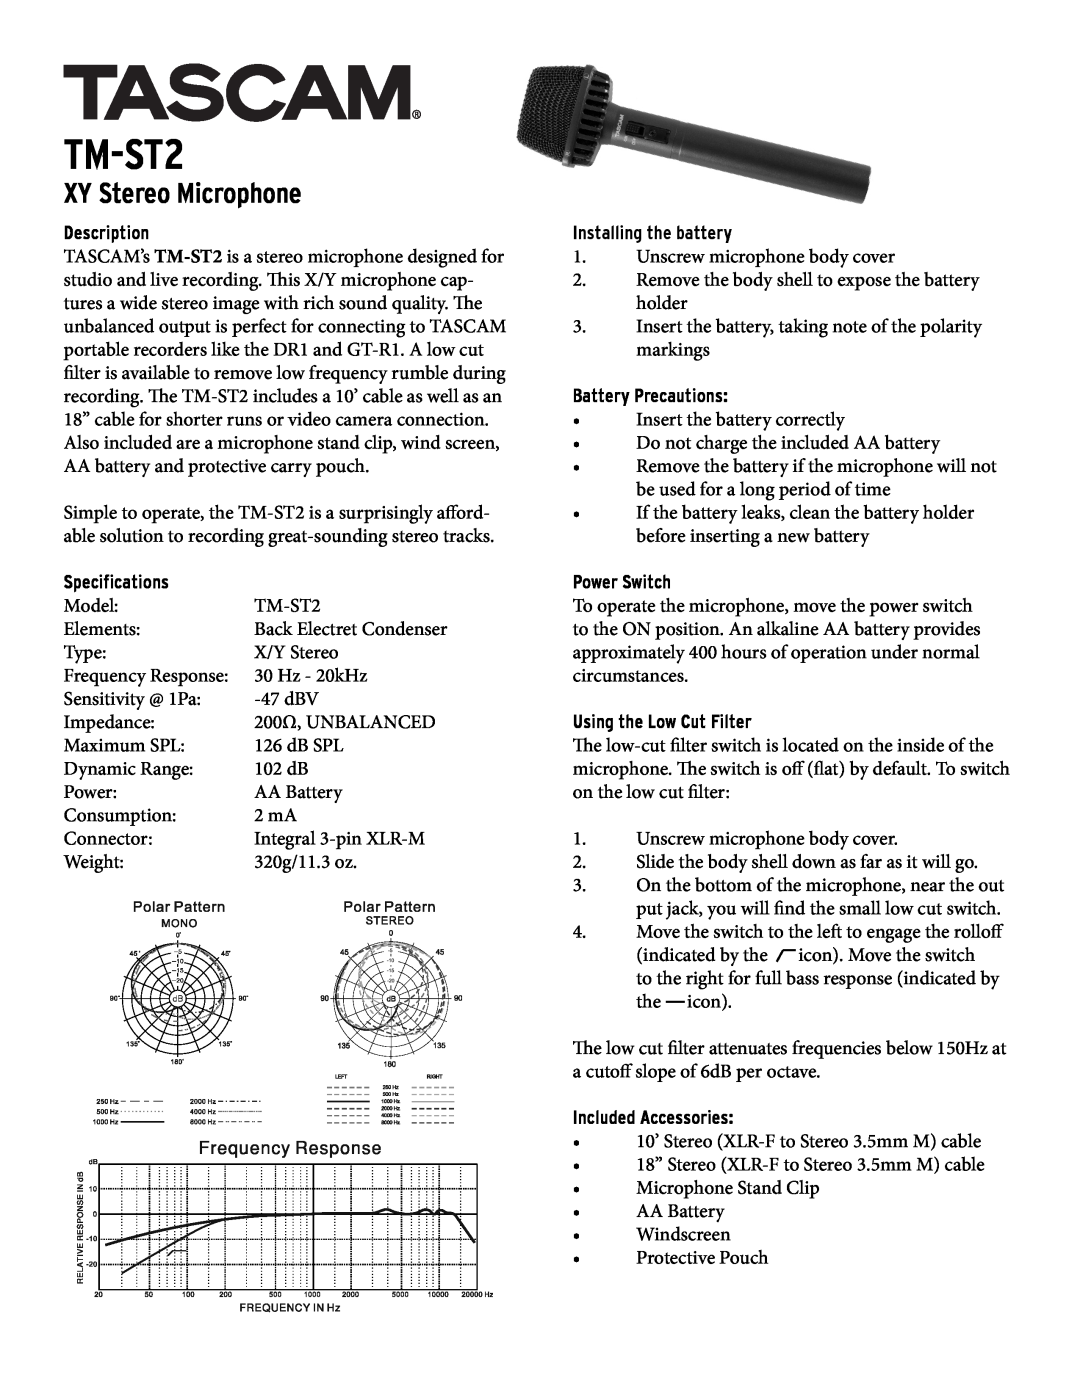 Tascam TM-ST2 specifications XY Stereo Microphone, Description, Speciﬁcations, Installing the battery, Battery Precautions 